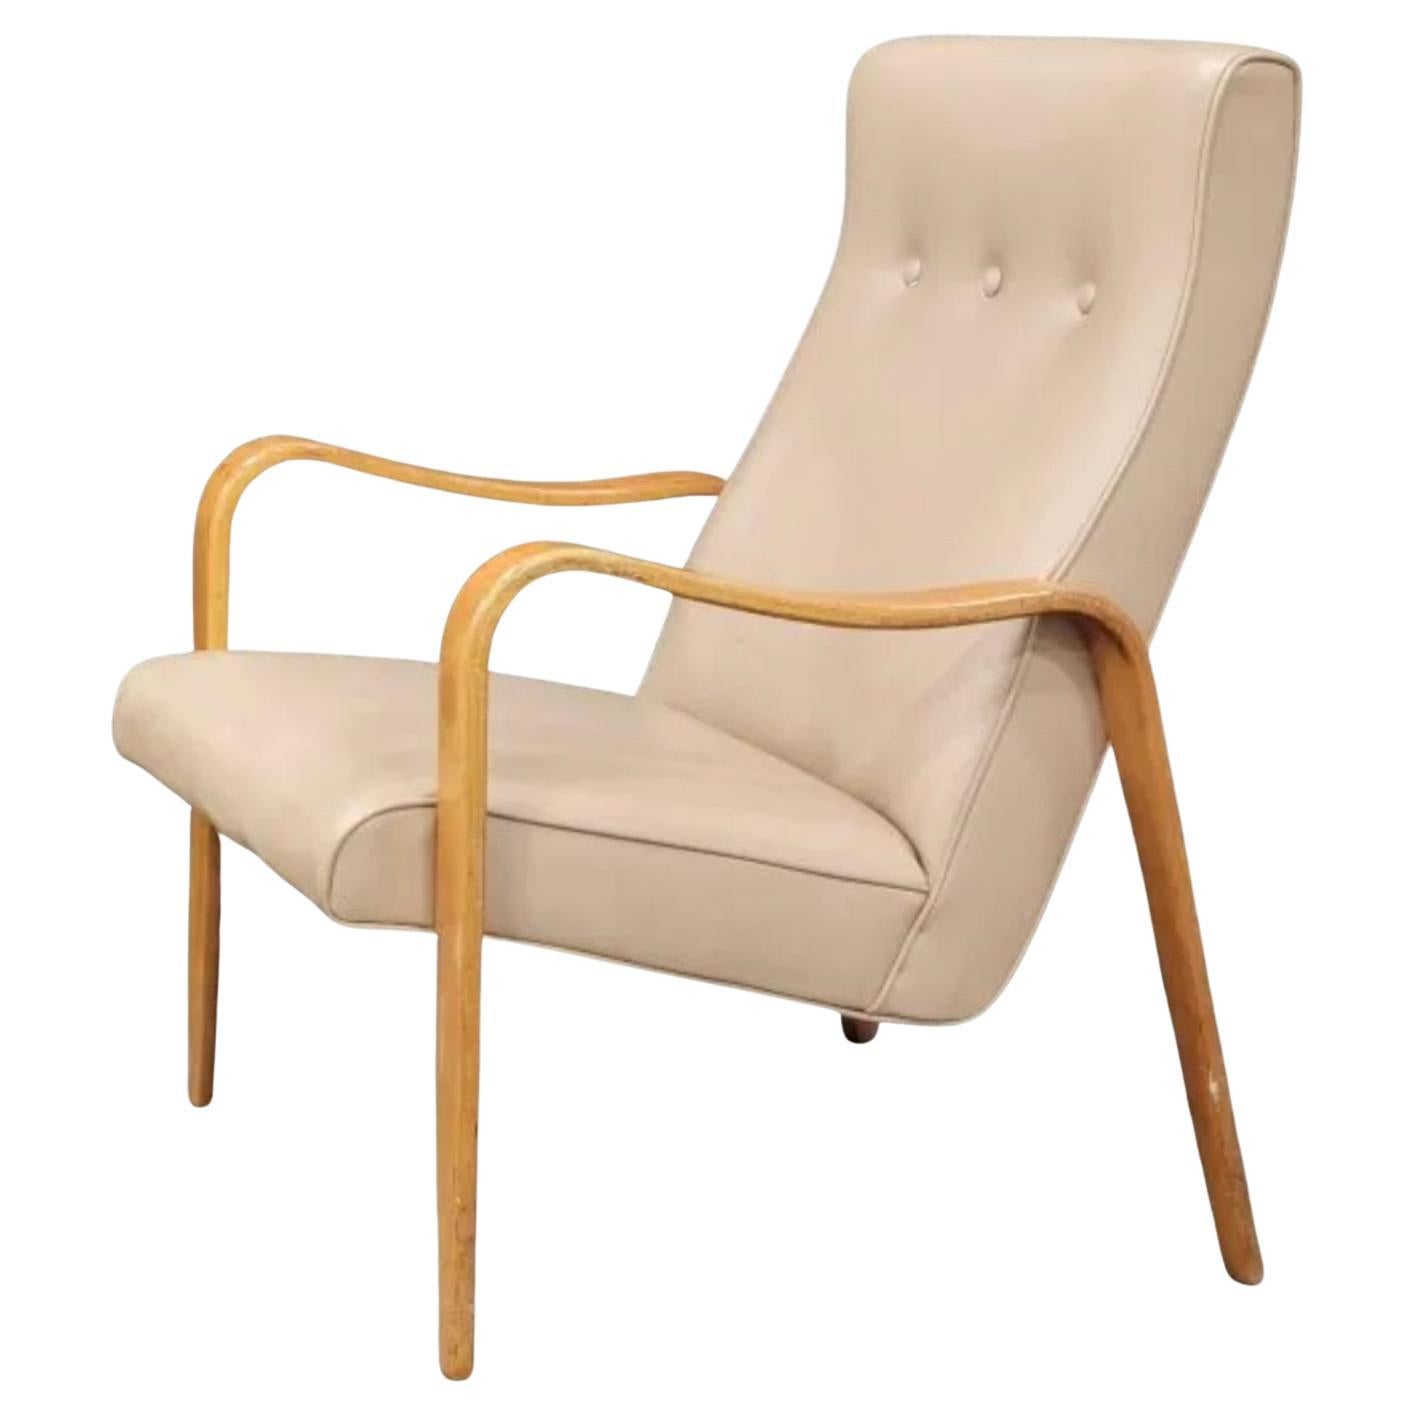 Pair of Mid-Century Modern Thonet bentwood birch lounge arm chairs. Has original medium pastel Tan Sand vinyl upholstery. Great vintage condition. Timeless chair design by Thonet. Curved birch bentwood arms. Chairs sold as a set of (2). Located in